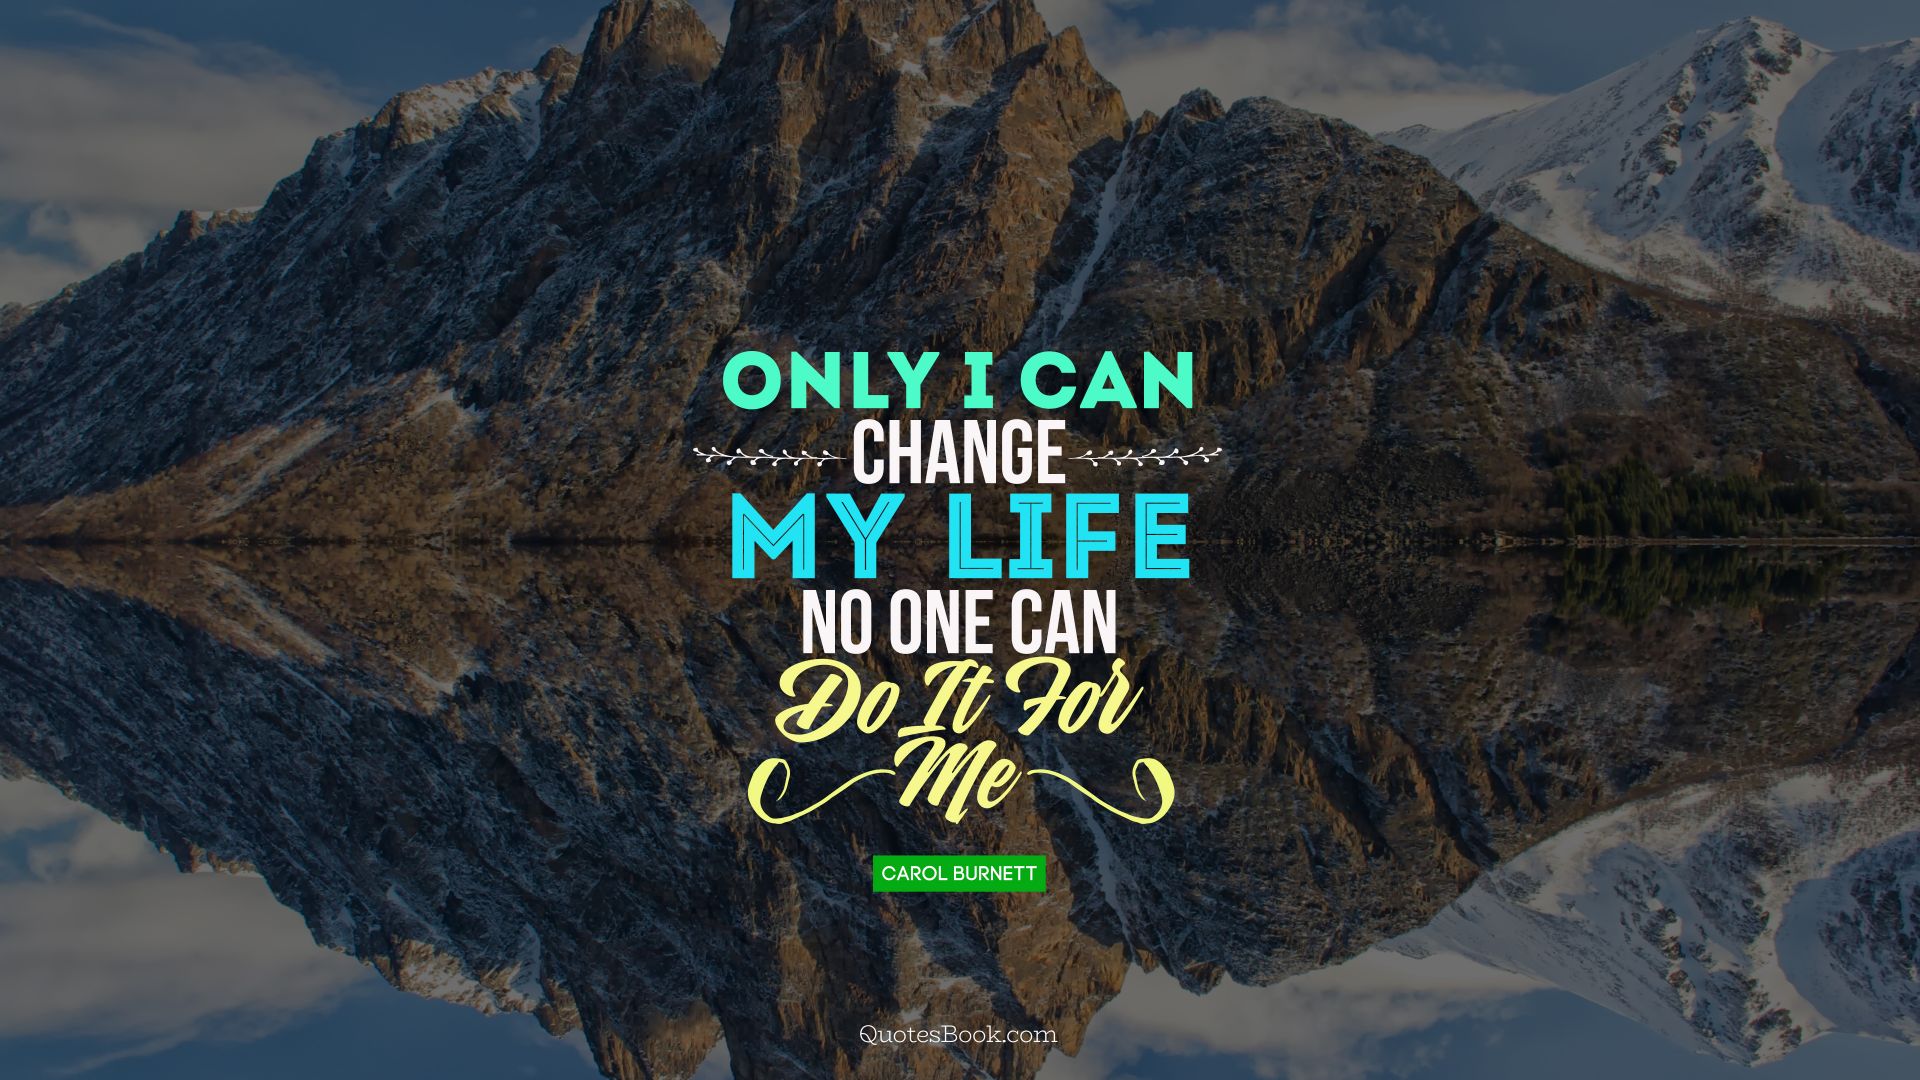 Only I can change my life. No one can do it for me. - Quote by Carol Burnett